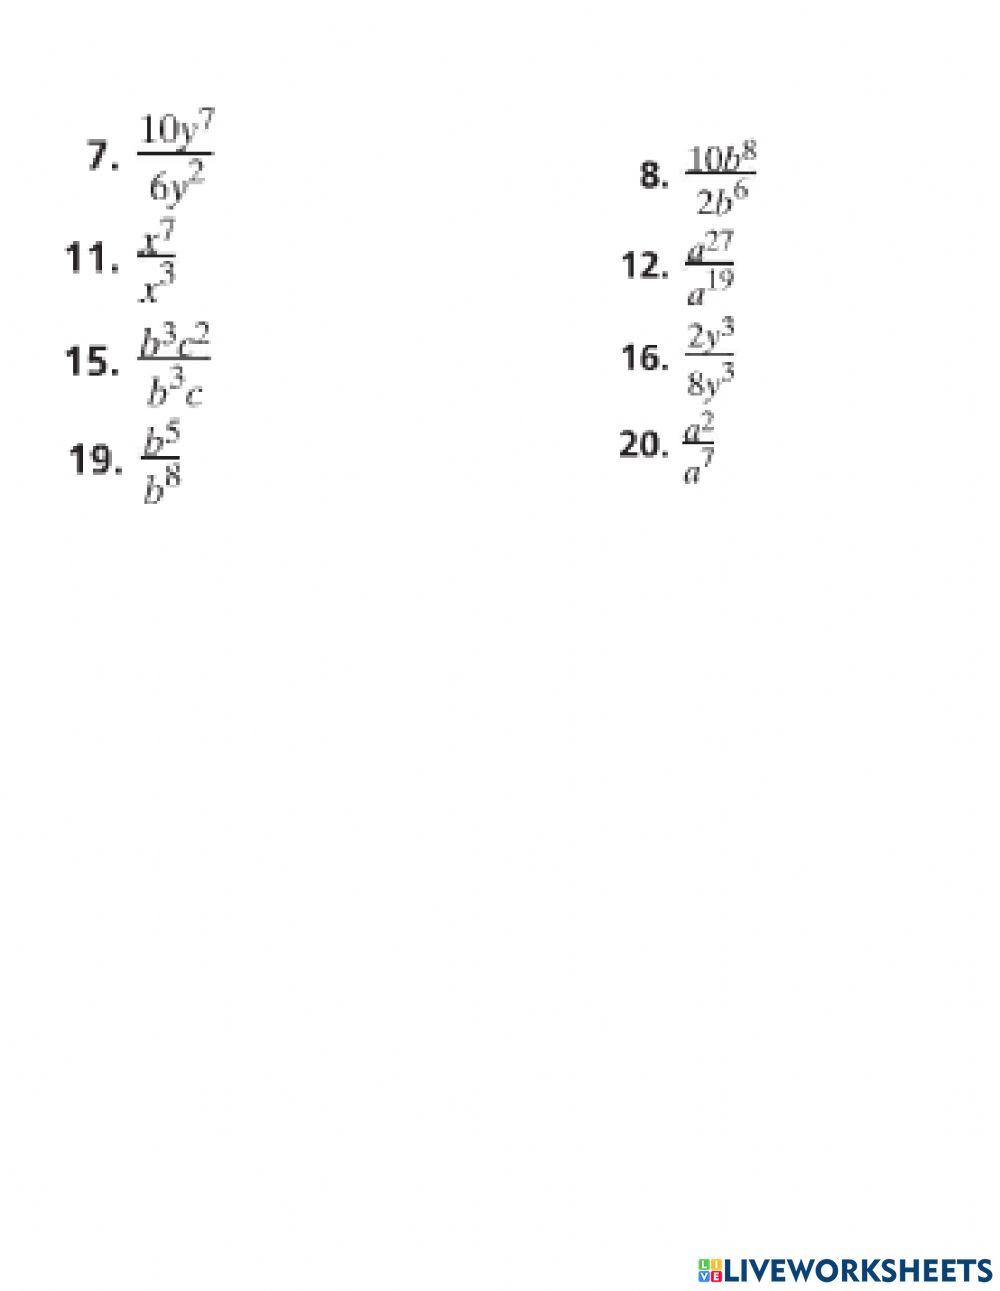 Exponents and division